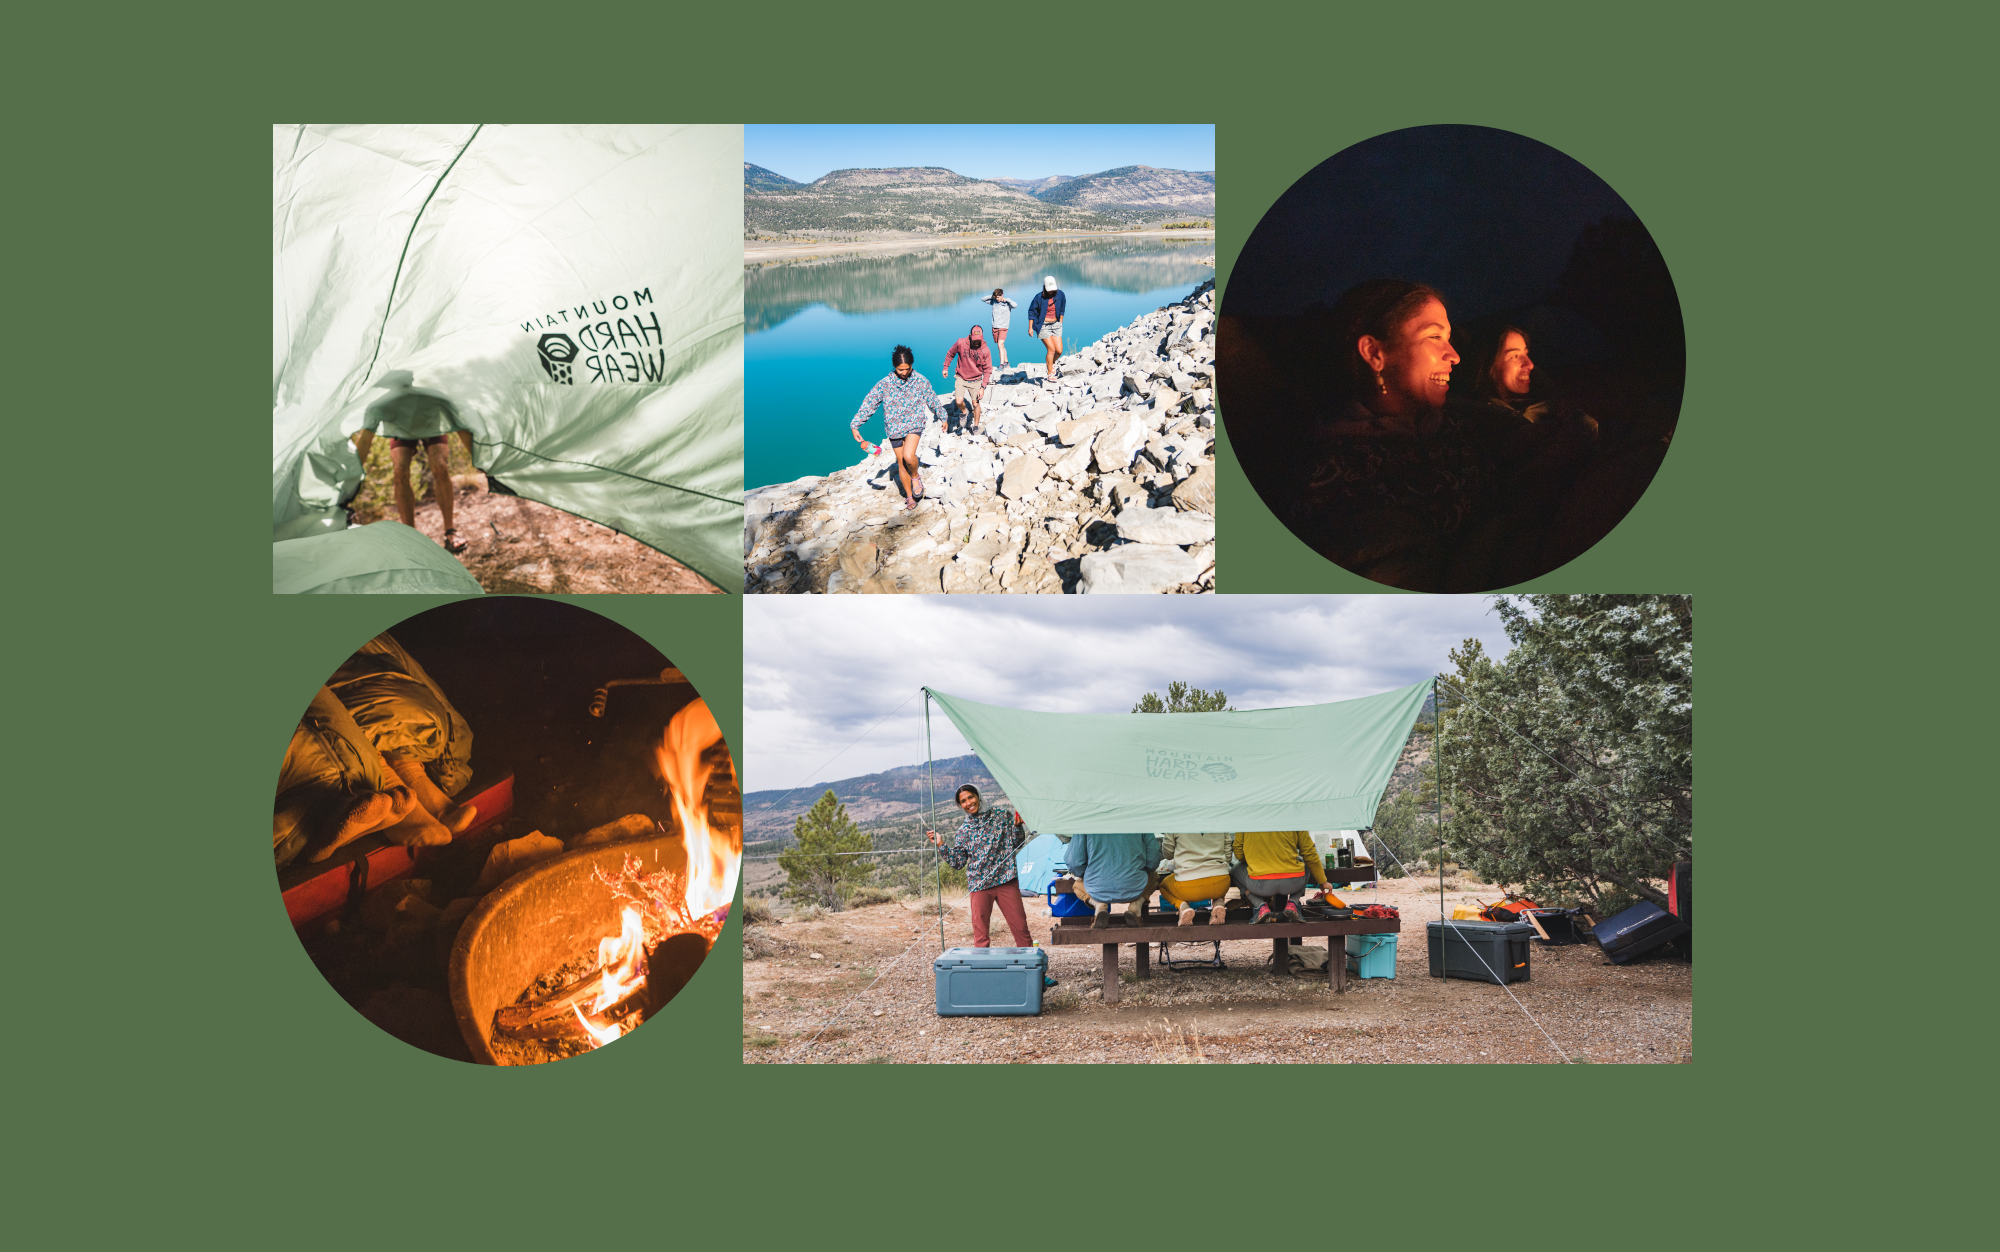 Several images of camp discovery and downtime activities: setting up camp, hiking nearby, sitting by the fire, and sitting around the campsite table.